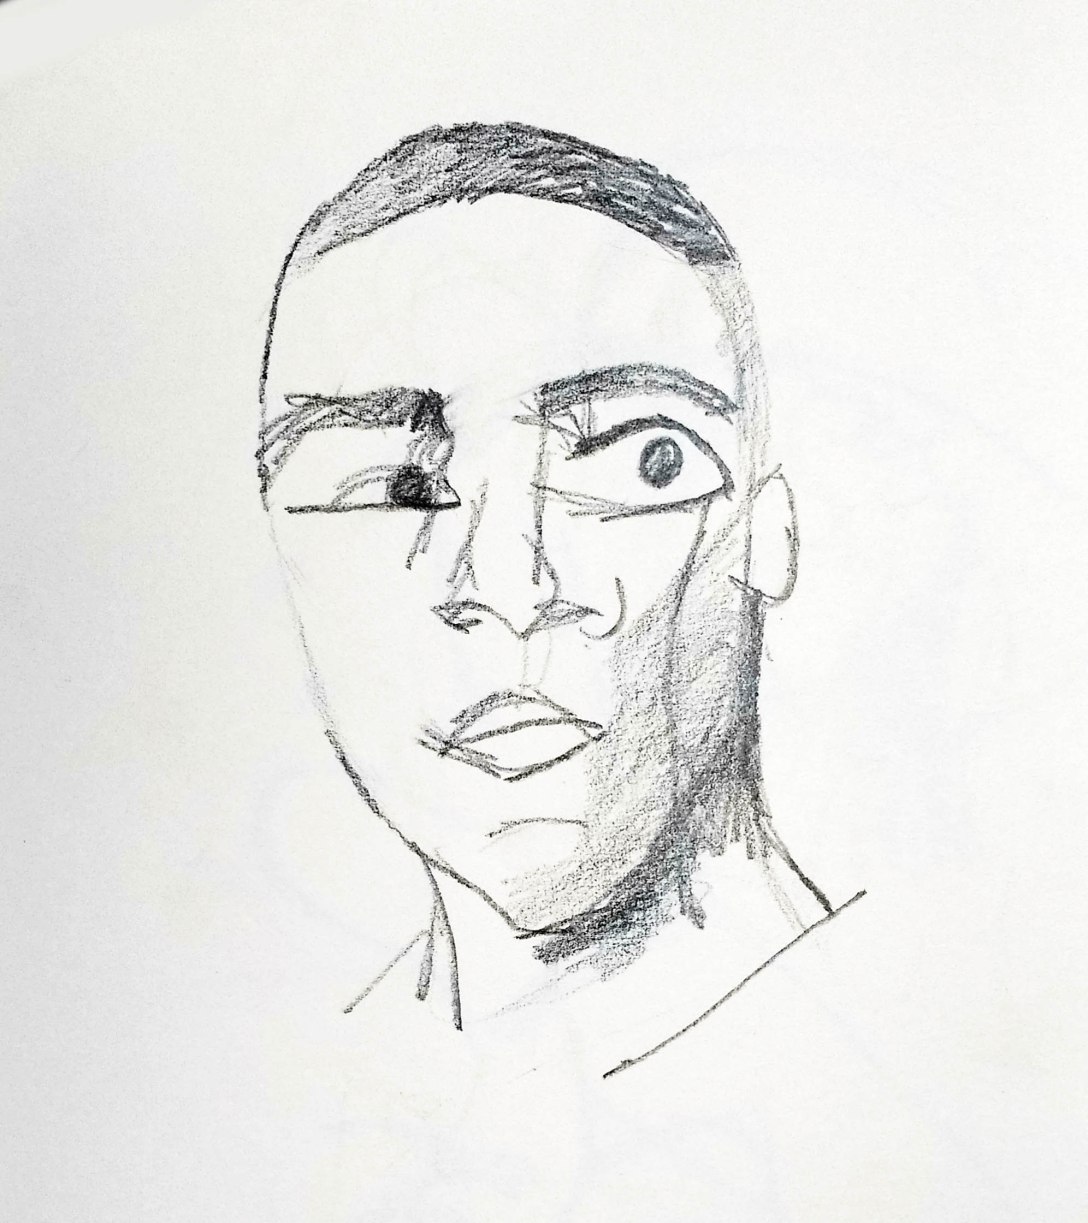 Blind contour drawing - Wikipedia